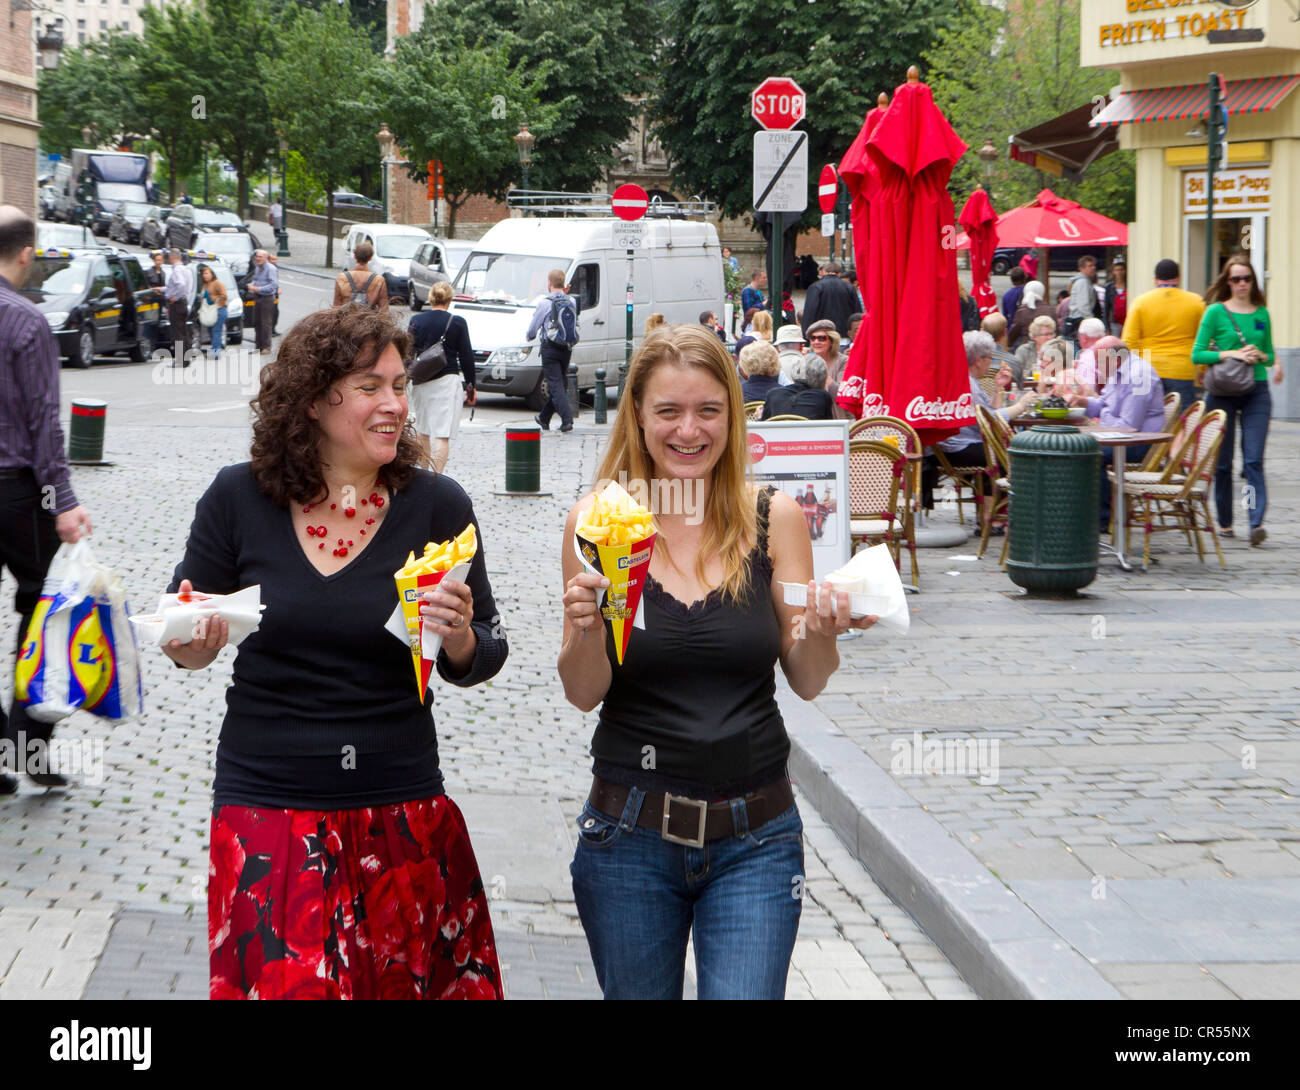 chips french fries belgium frites bruxelles woman women girl girls female females street snack food happy smile smiling 2 two yo Stock Photo